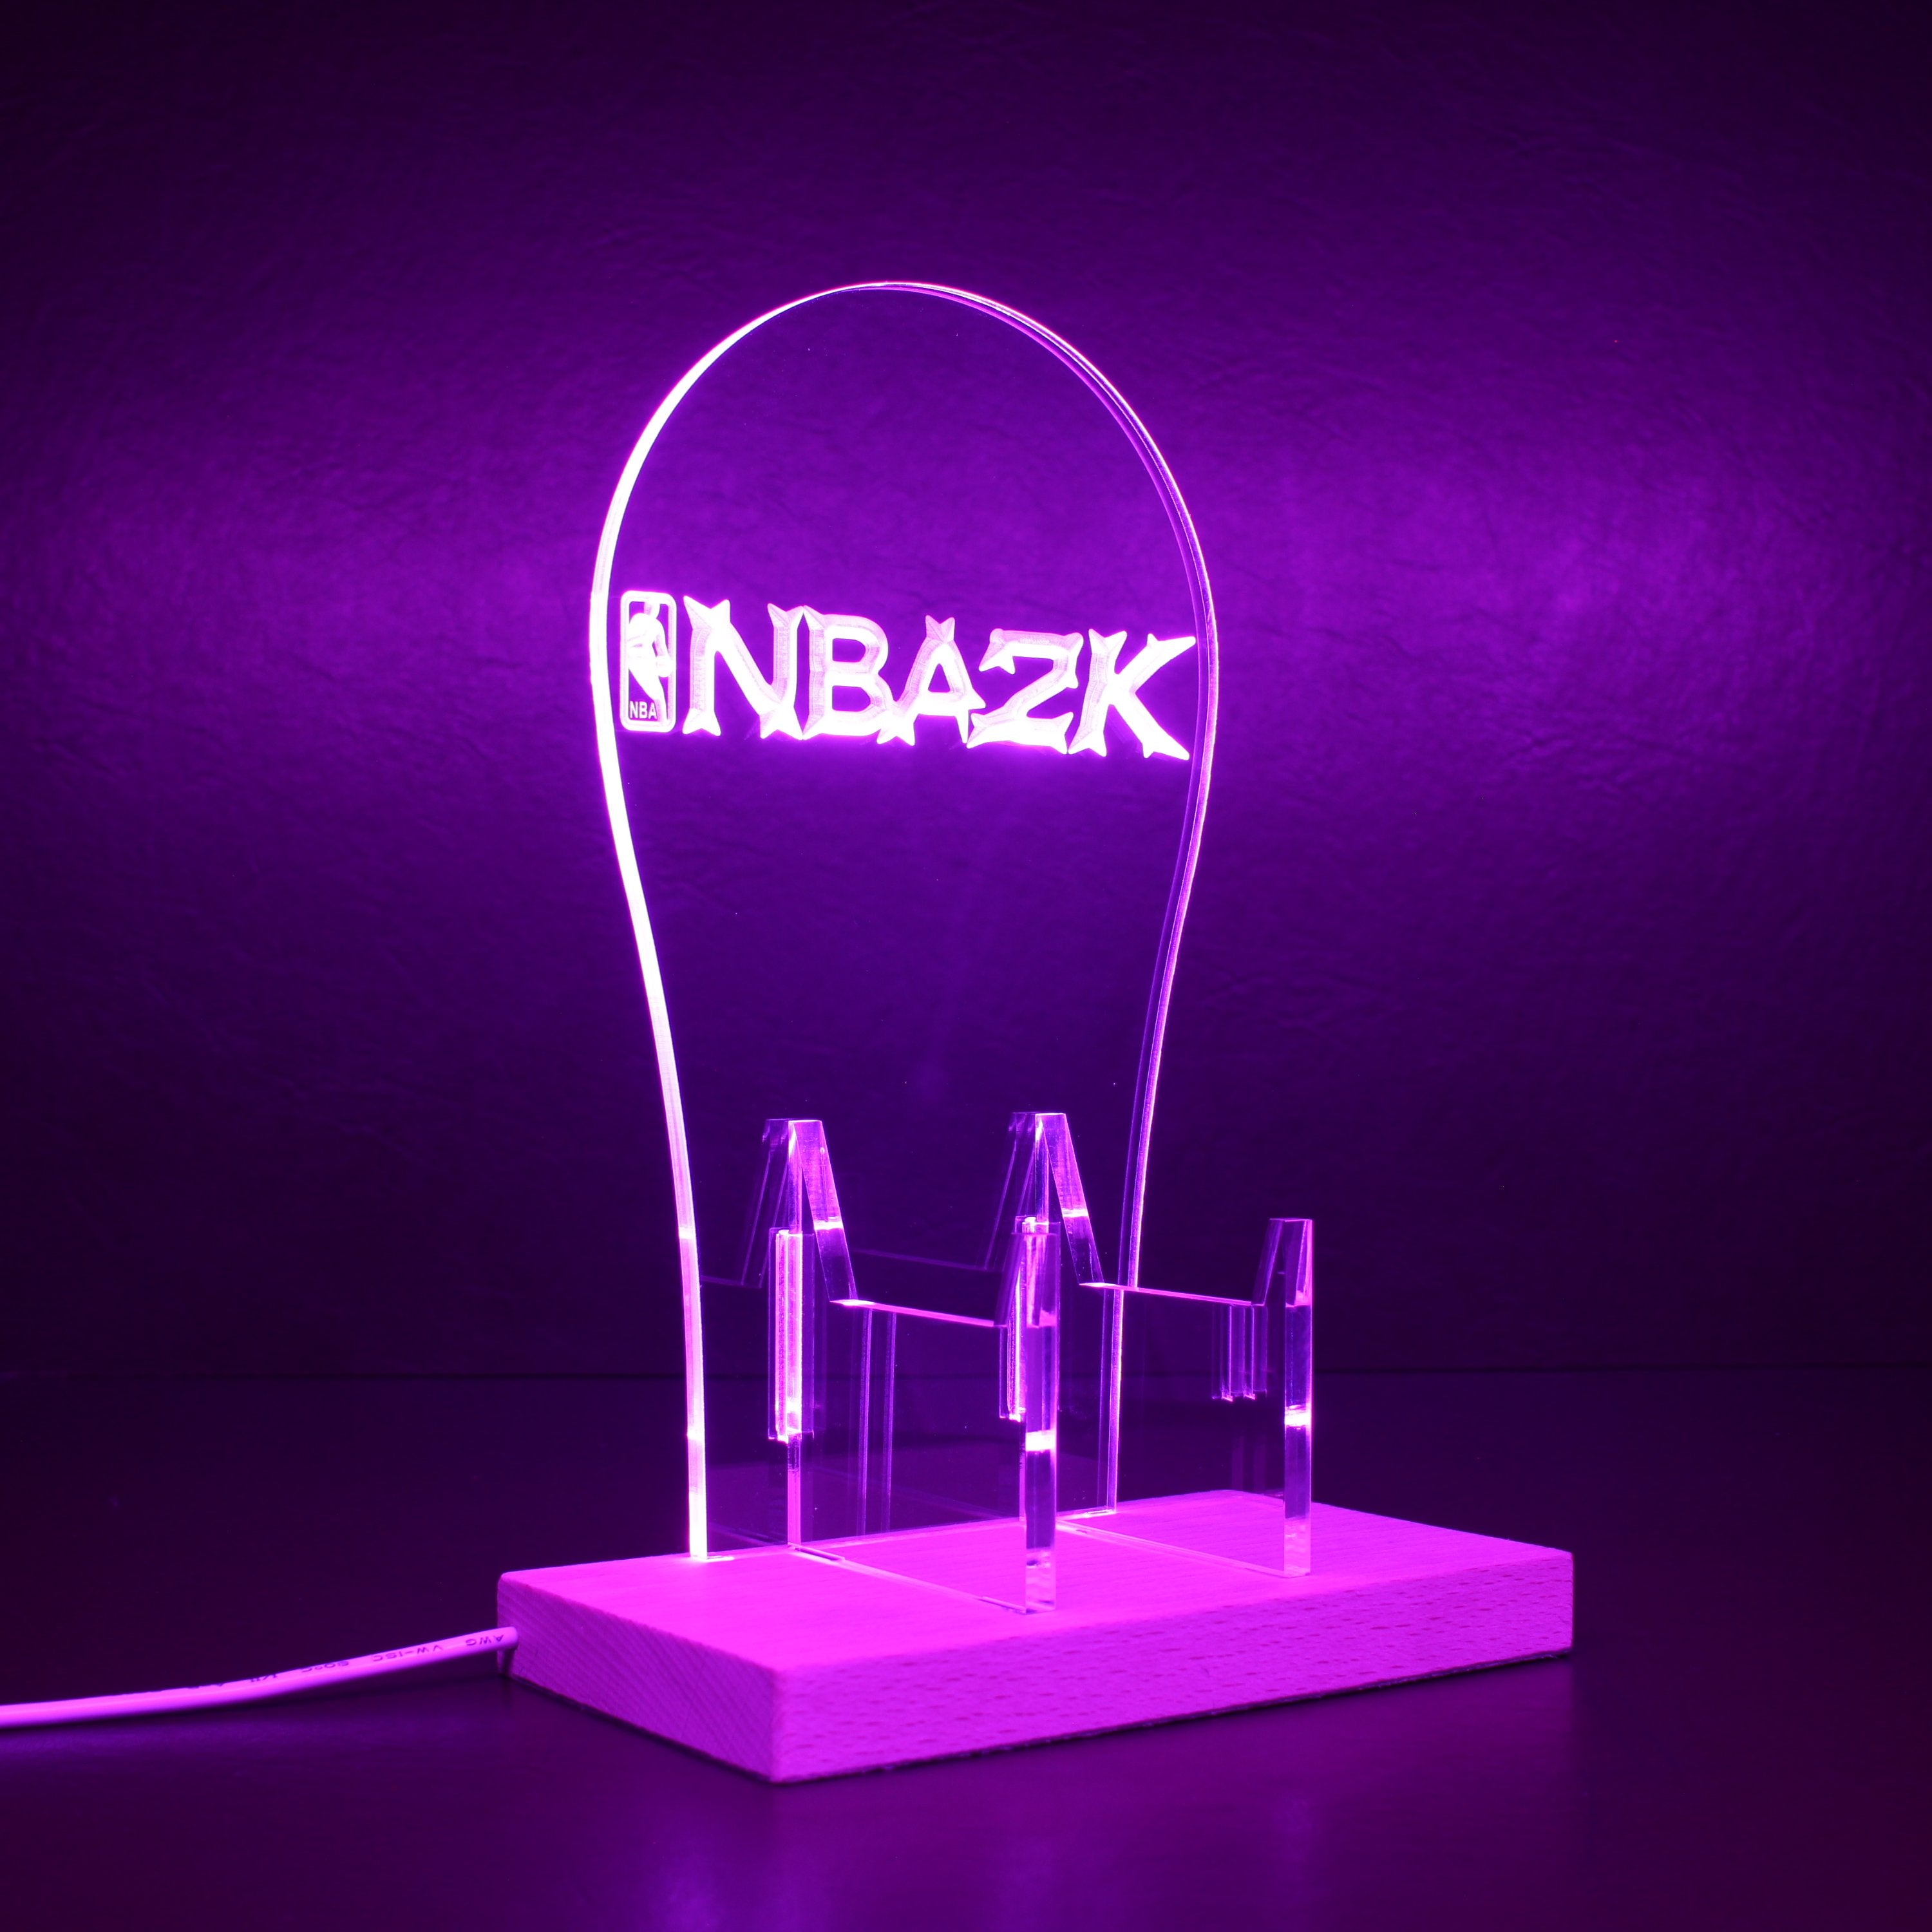 NBA2K RGB LED Gaming Headset Controller Stand